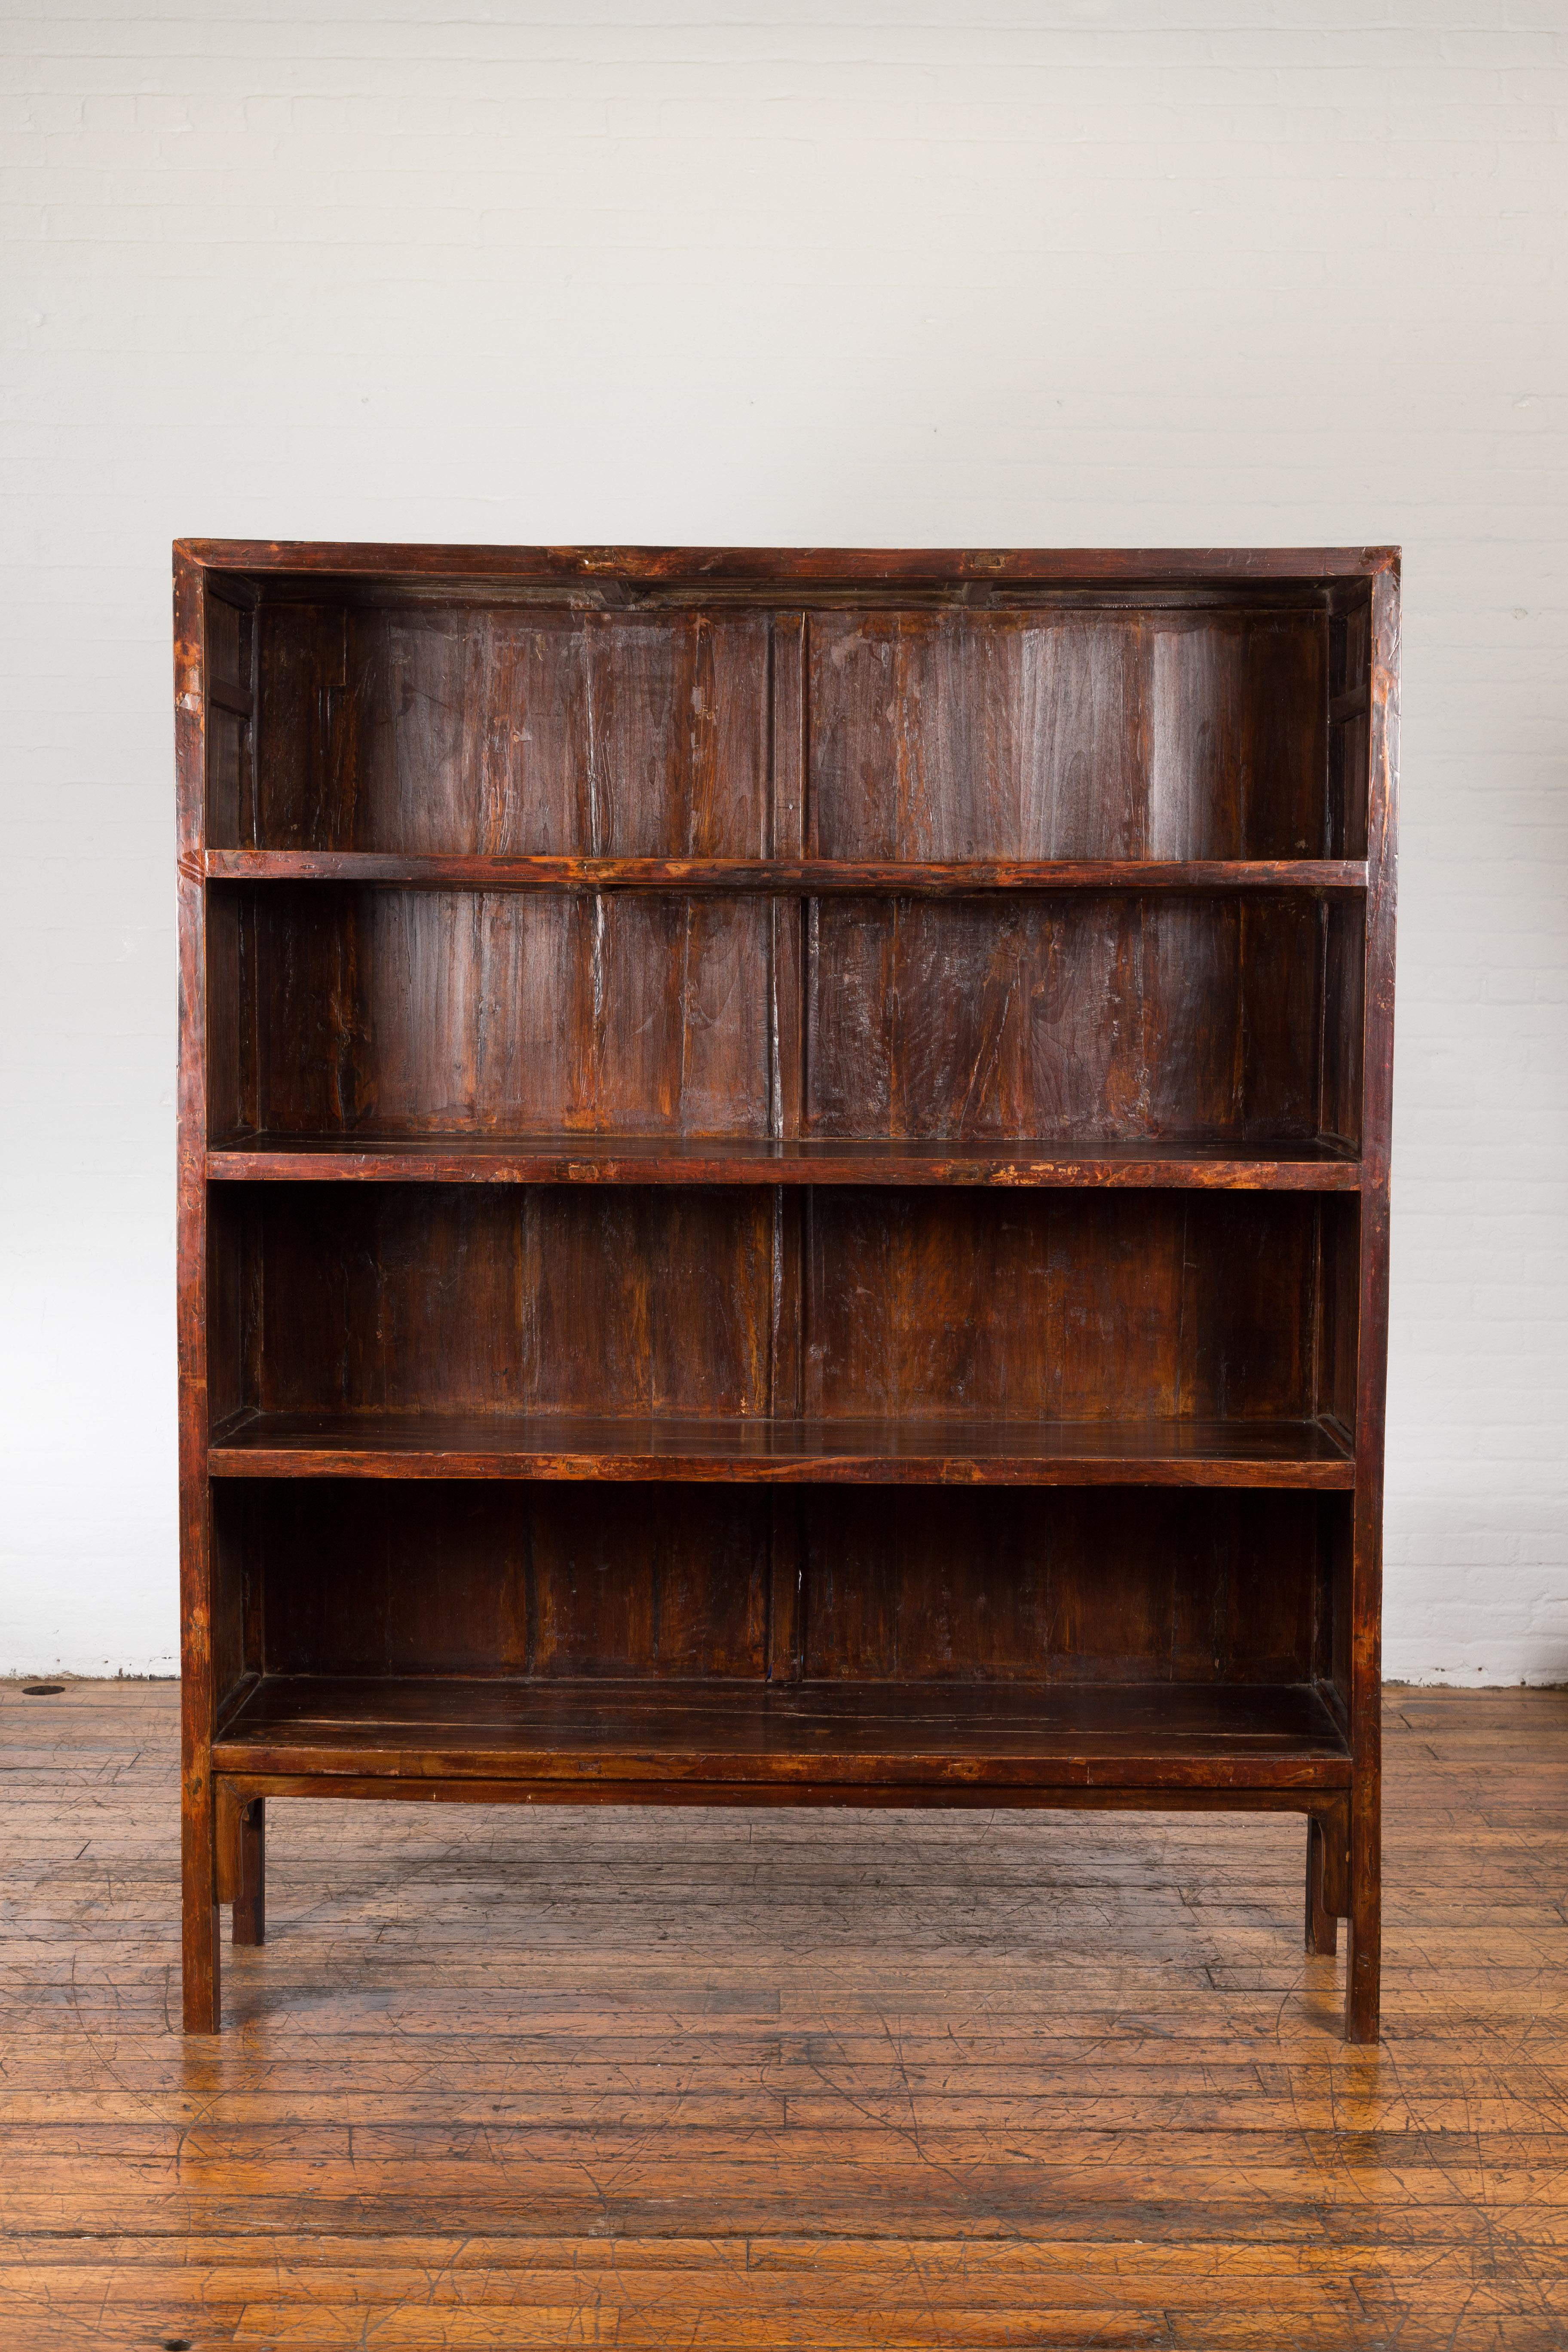 A Chinese Qing Dynasty period lacquered bookcase from the 19th century, with four shelves, straight legs, carved apron and weathered patina. Created in China during the Qing Dynasty period in the 19th century, this large bookcase features a linear